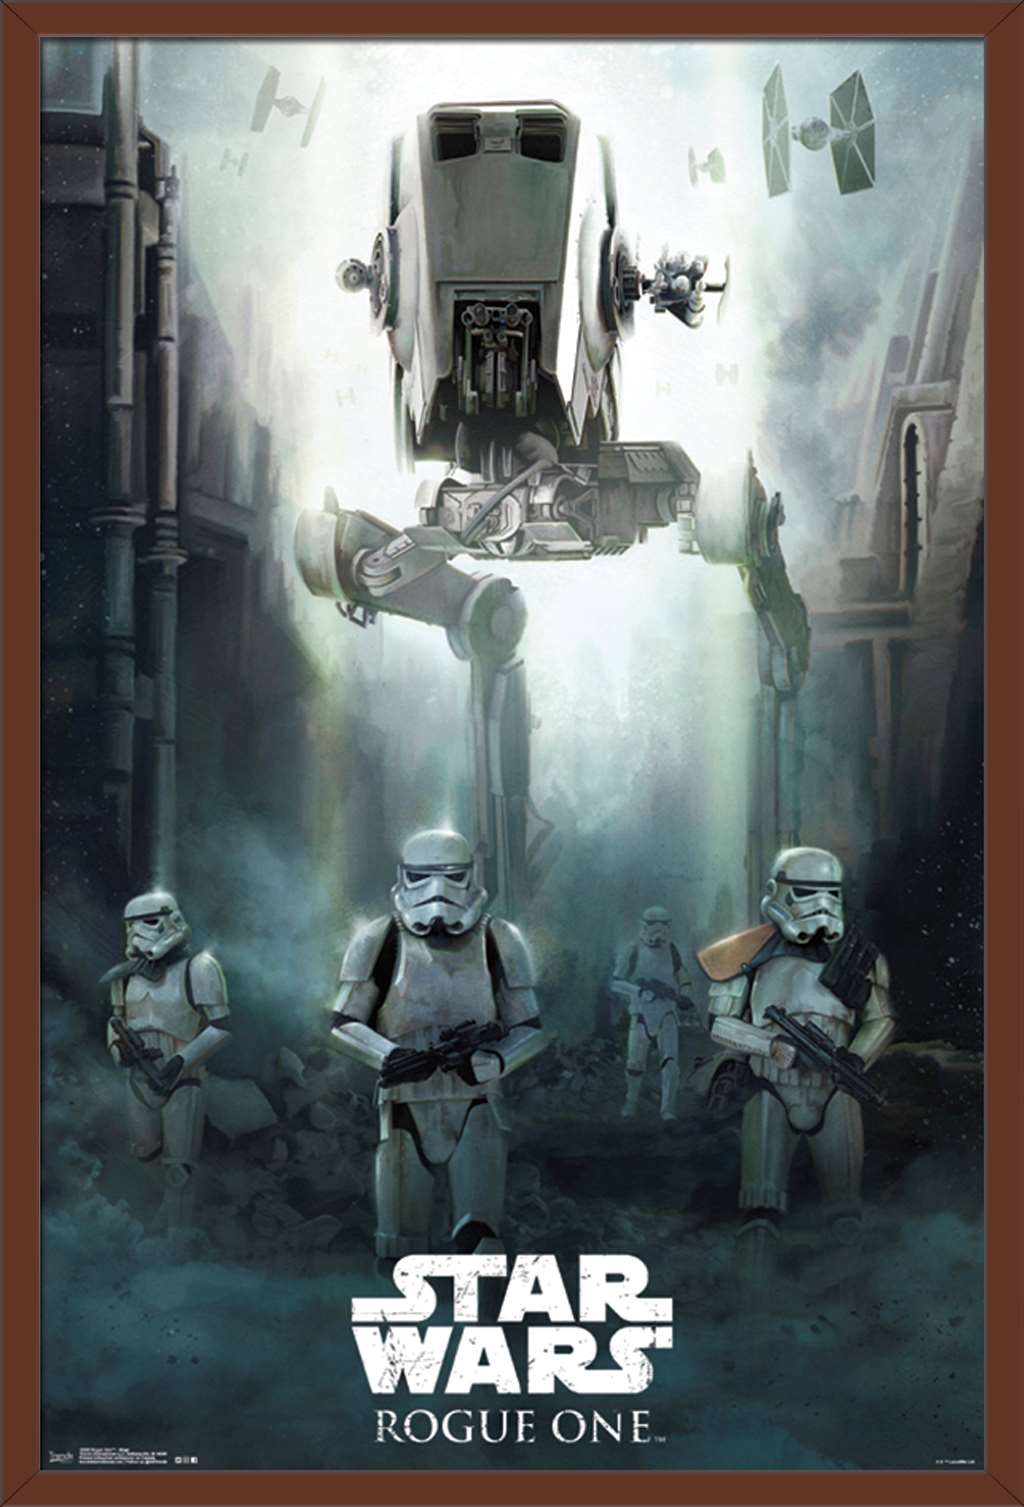 Star Wars: Rogue One - Siege Wall Poster, 22.375" x 34", Framed - image 1 of 2